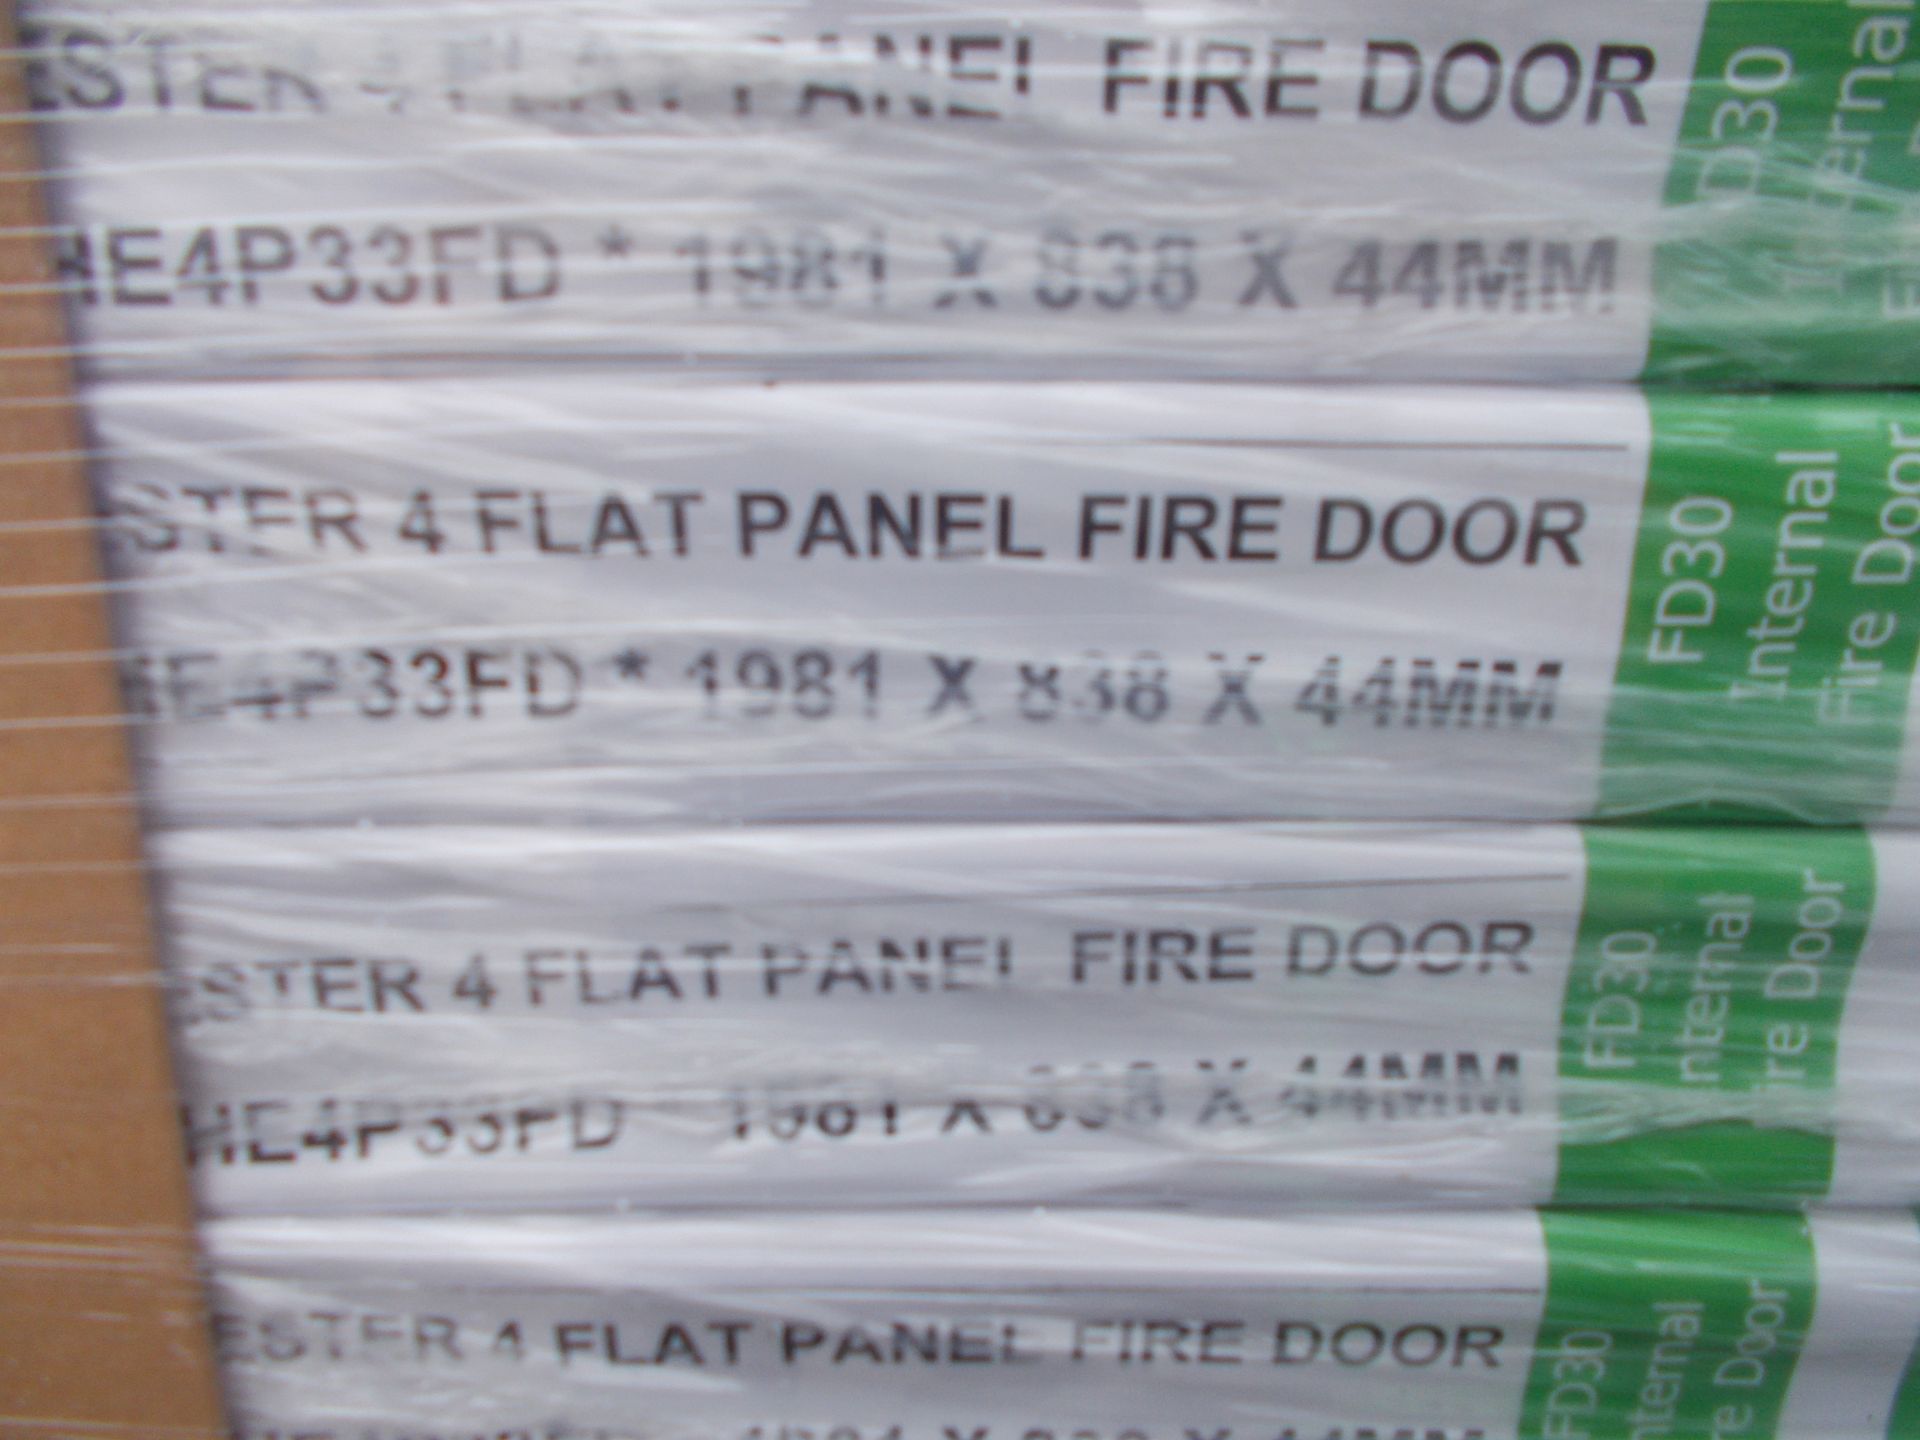 4 x Chester 4 Flat Panel Internal Fire Door CHE4P33FD 1981x838x44mm - Lots to be handed out in order - Image 3 of 3